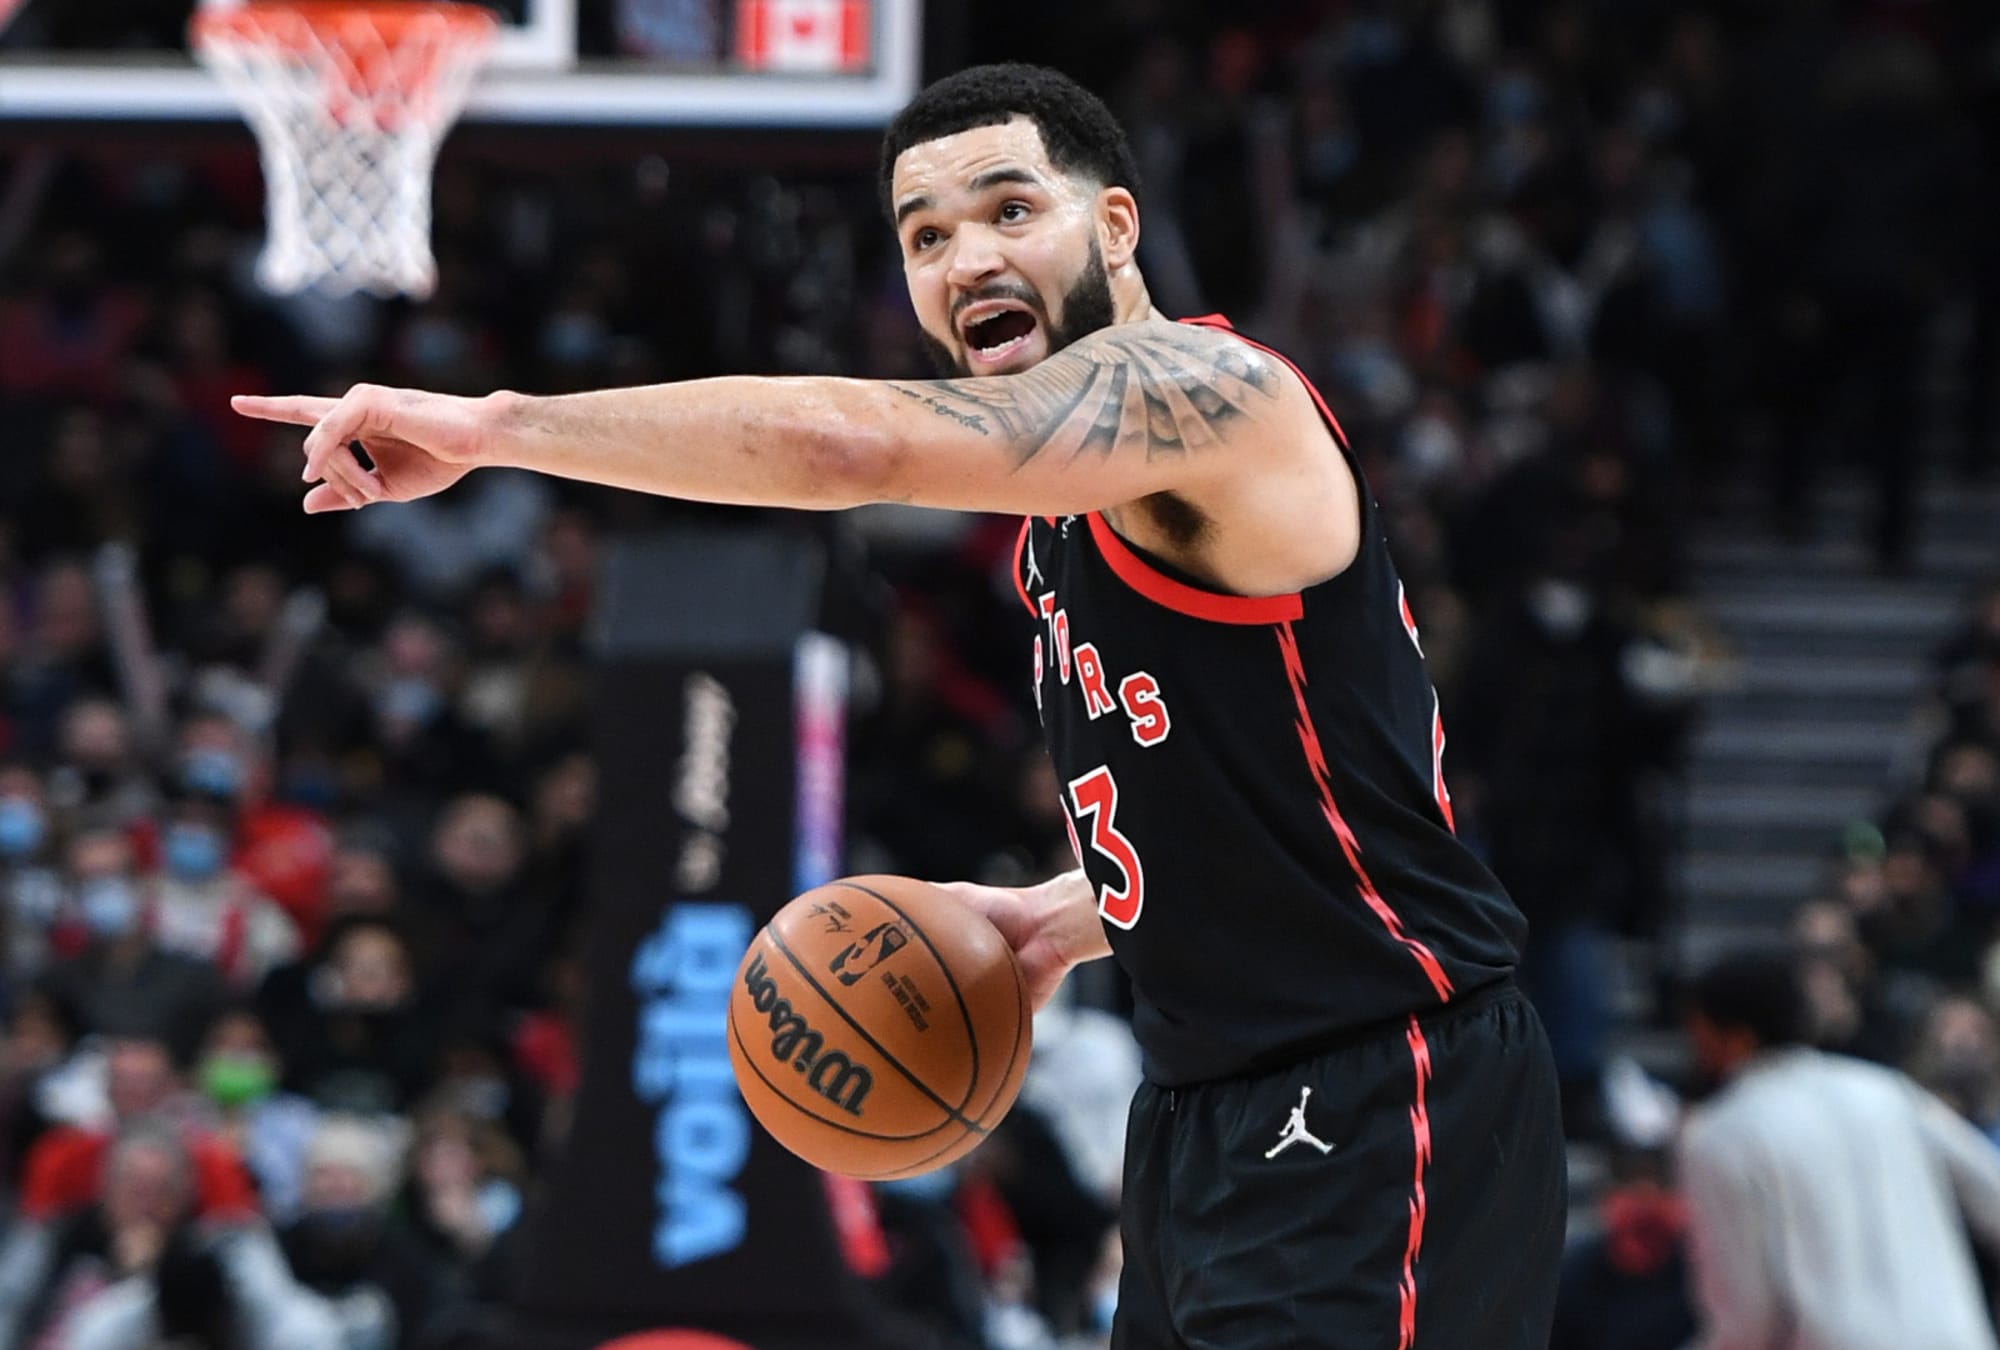 Here's how you can vote for Fred VanVleet to make the NBA All-Star